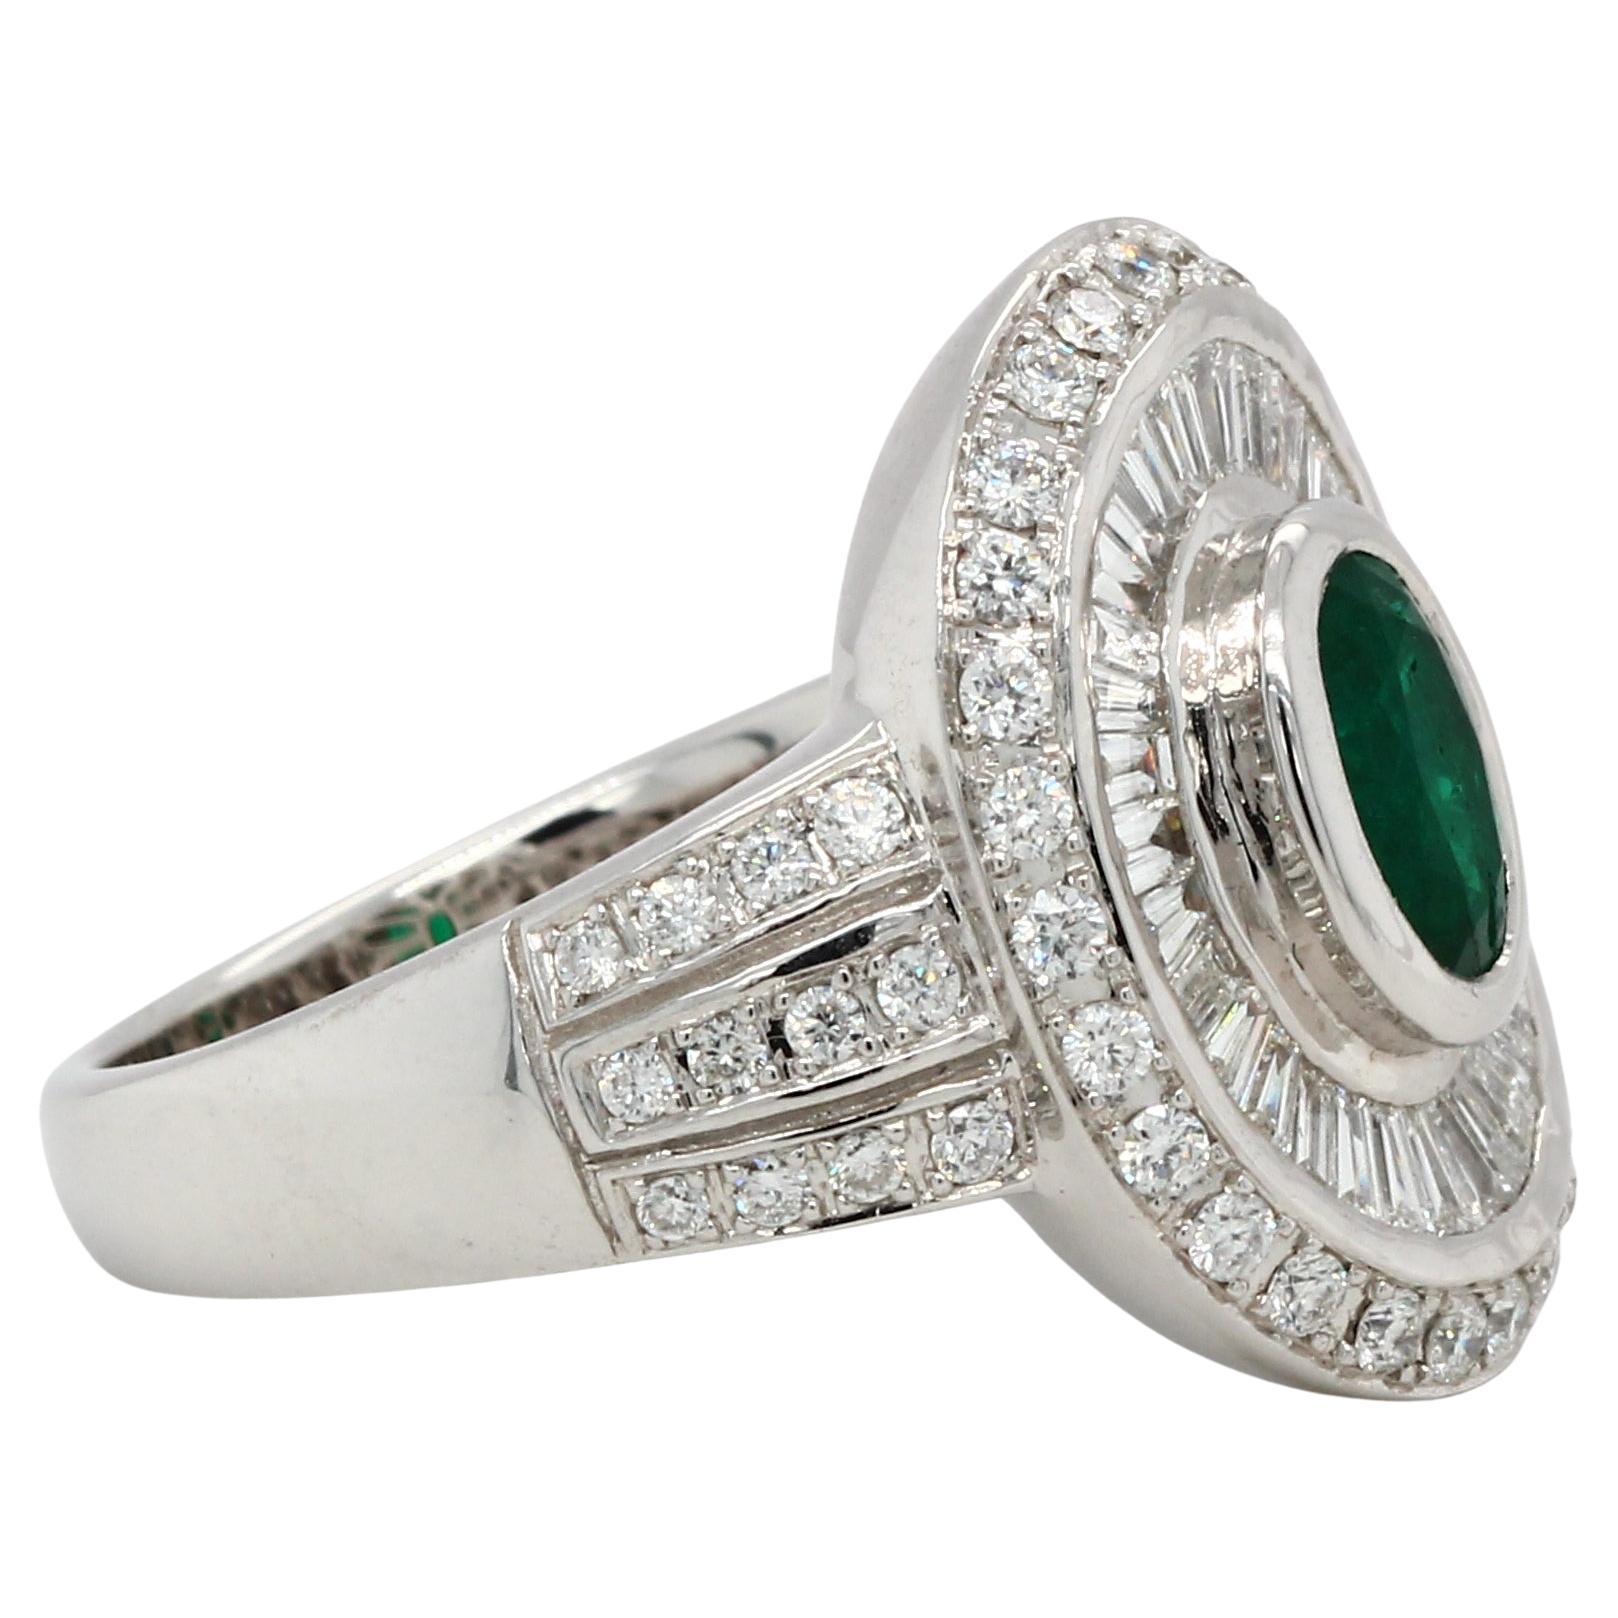 A brand new emerald and diamond 18K gold ring. A 0.92 carat emerald oval shape is set in this ring, which also includes a 0.52 carat diamond tapper and a 0.53 carat diamond round. This ring weighs 9.28 grams and is composed of 18K white